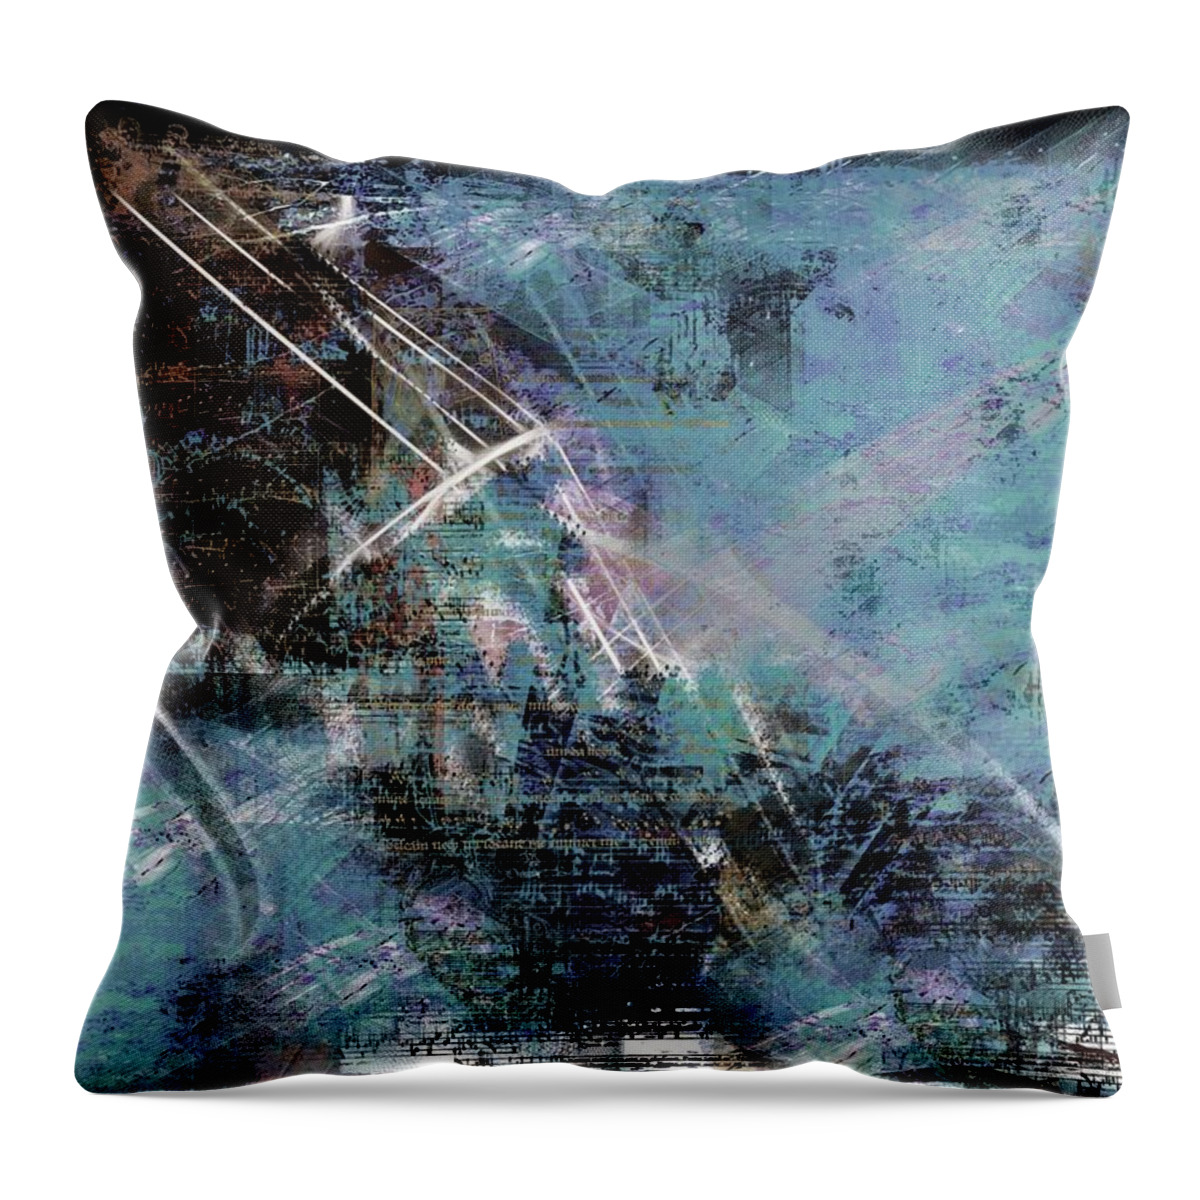 Abstract Throw Pillow featuring the digital art A Song Of Spring by Art Di